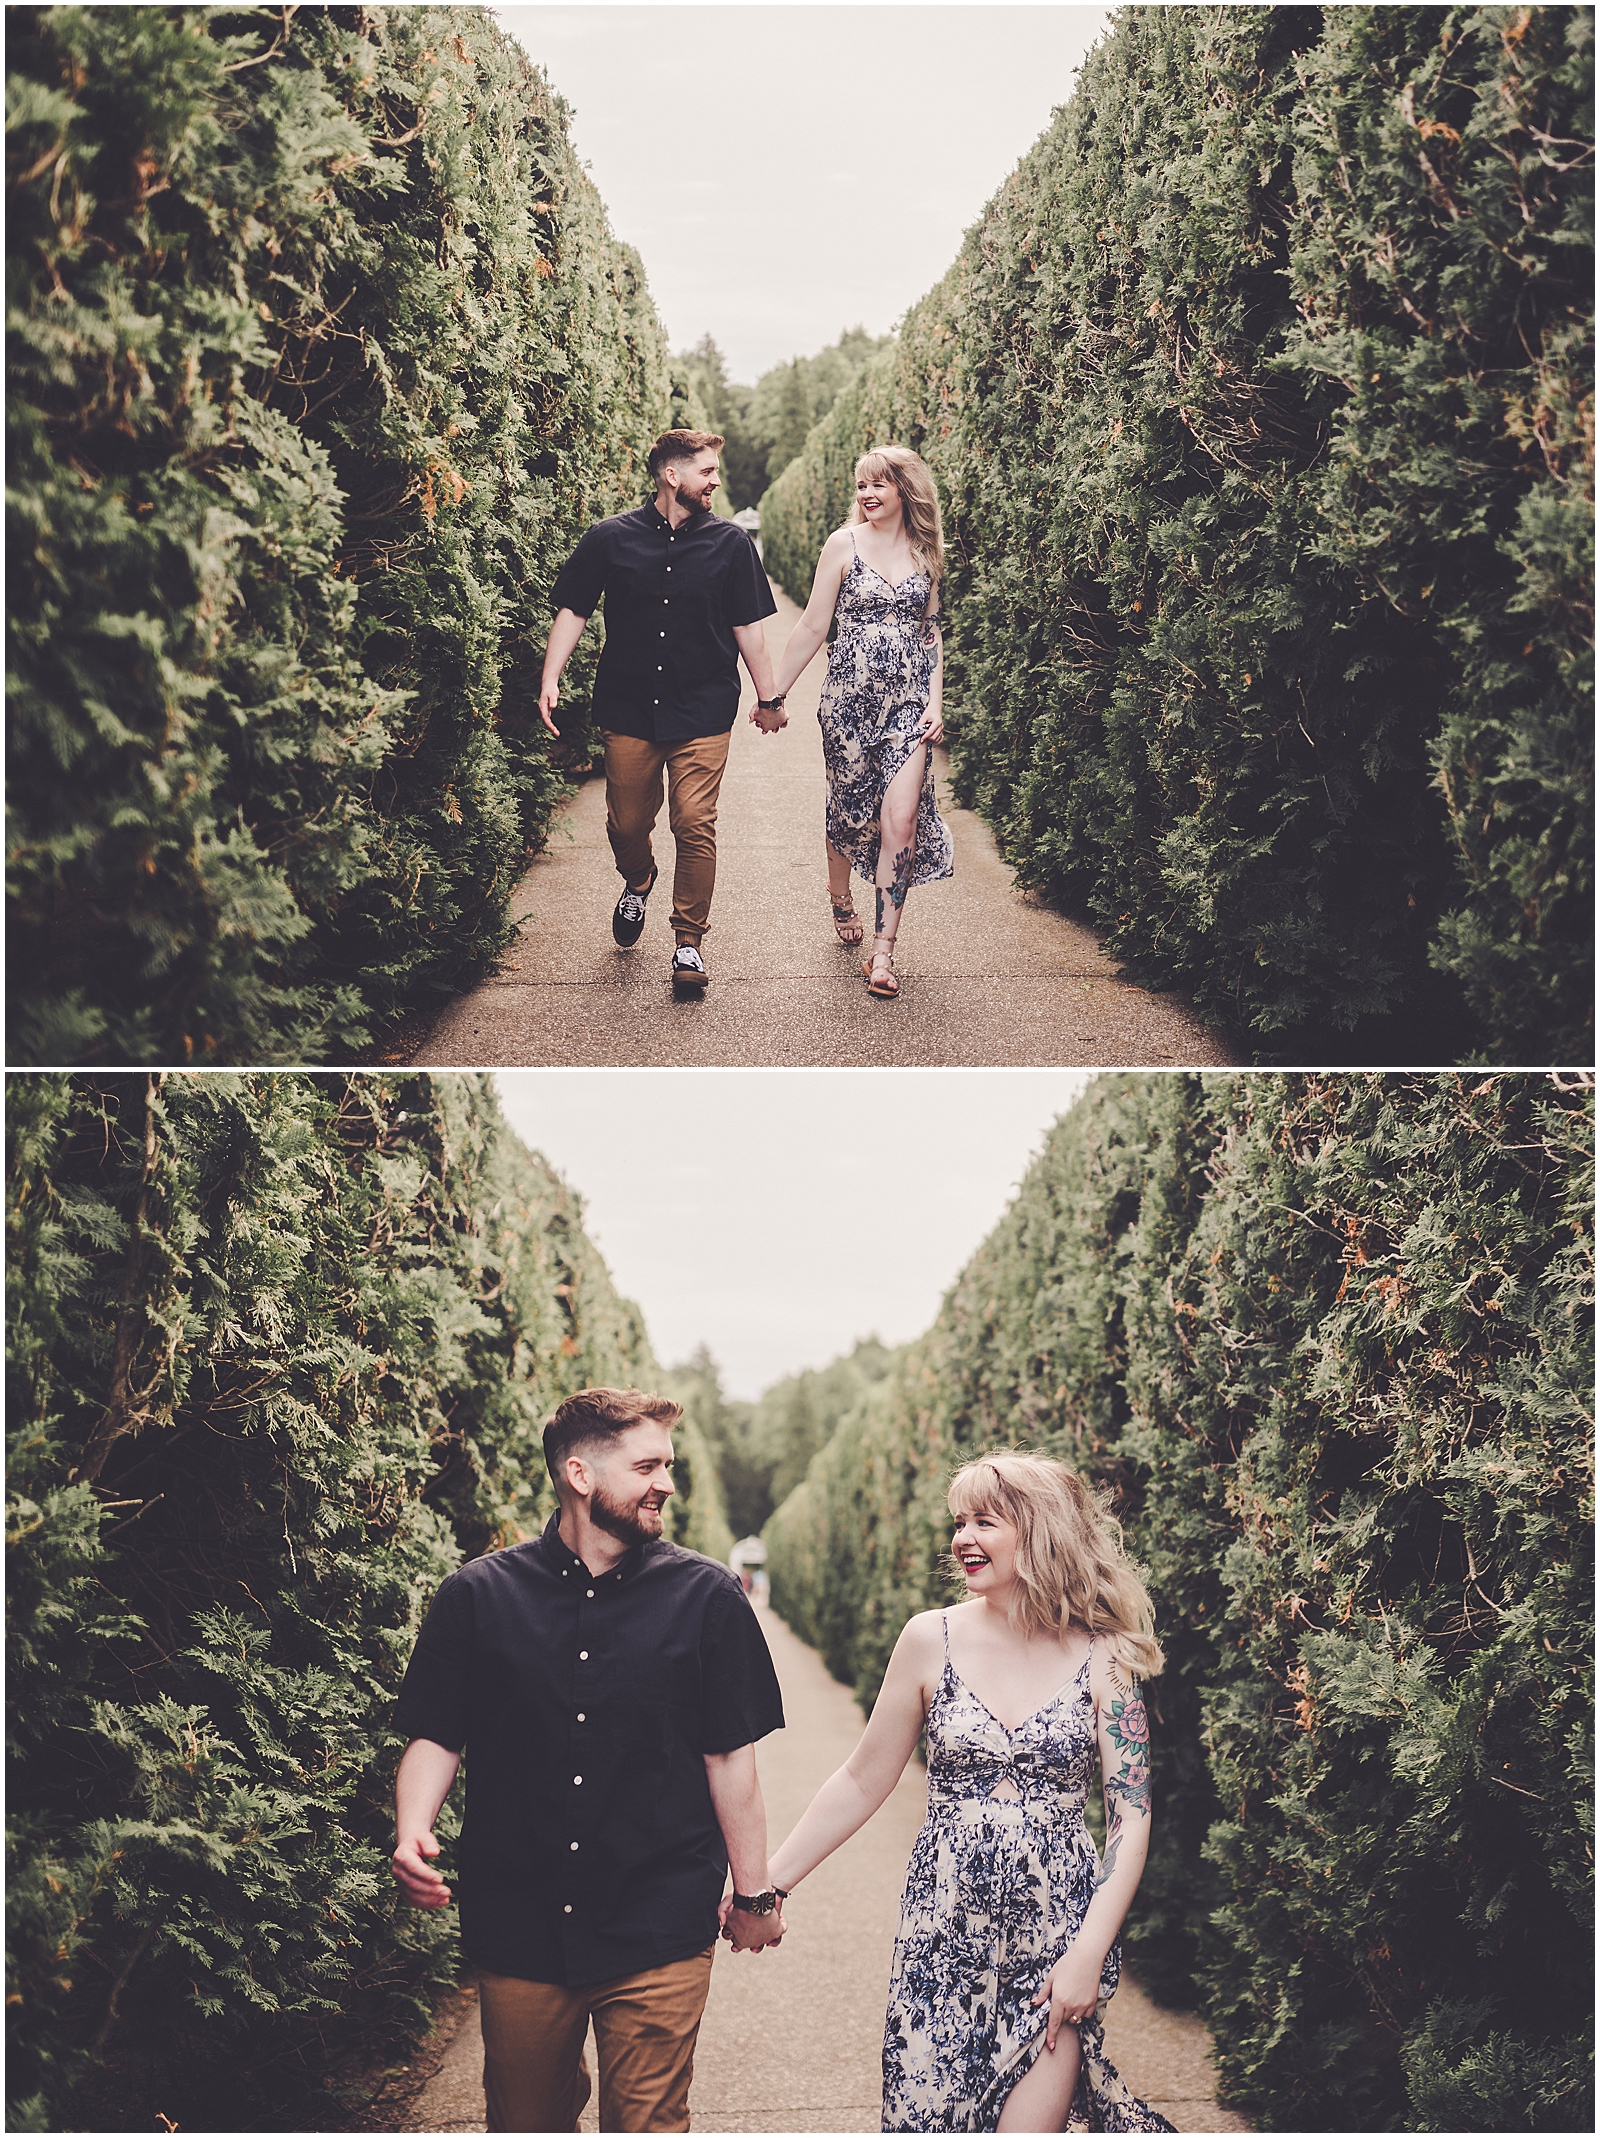 Hannah and Collin's summer engagement photos at Allerton Park in Monticello, IL with Chicagoland wedding photographer Kara Evans Photographer.